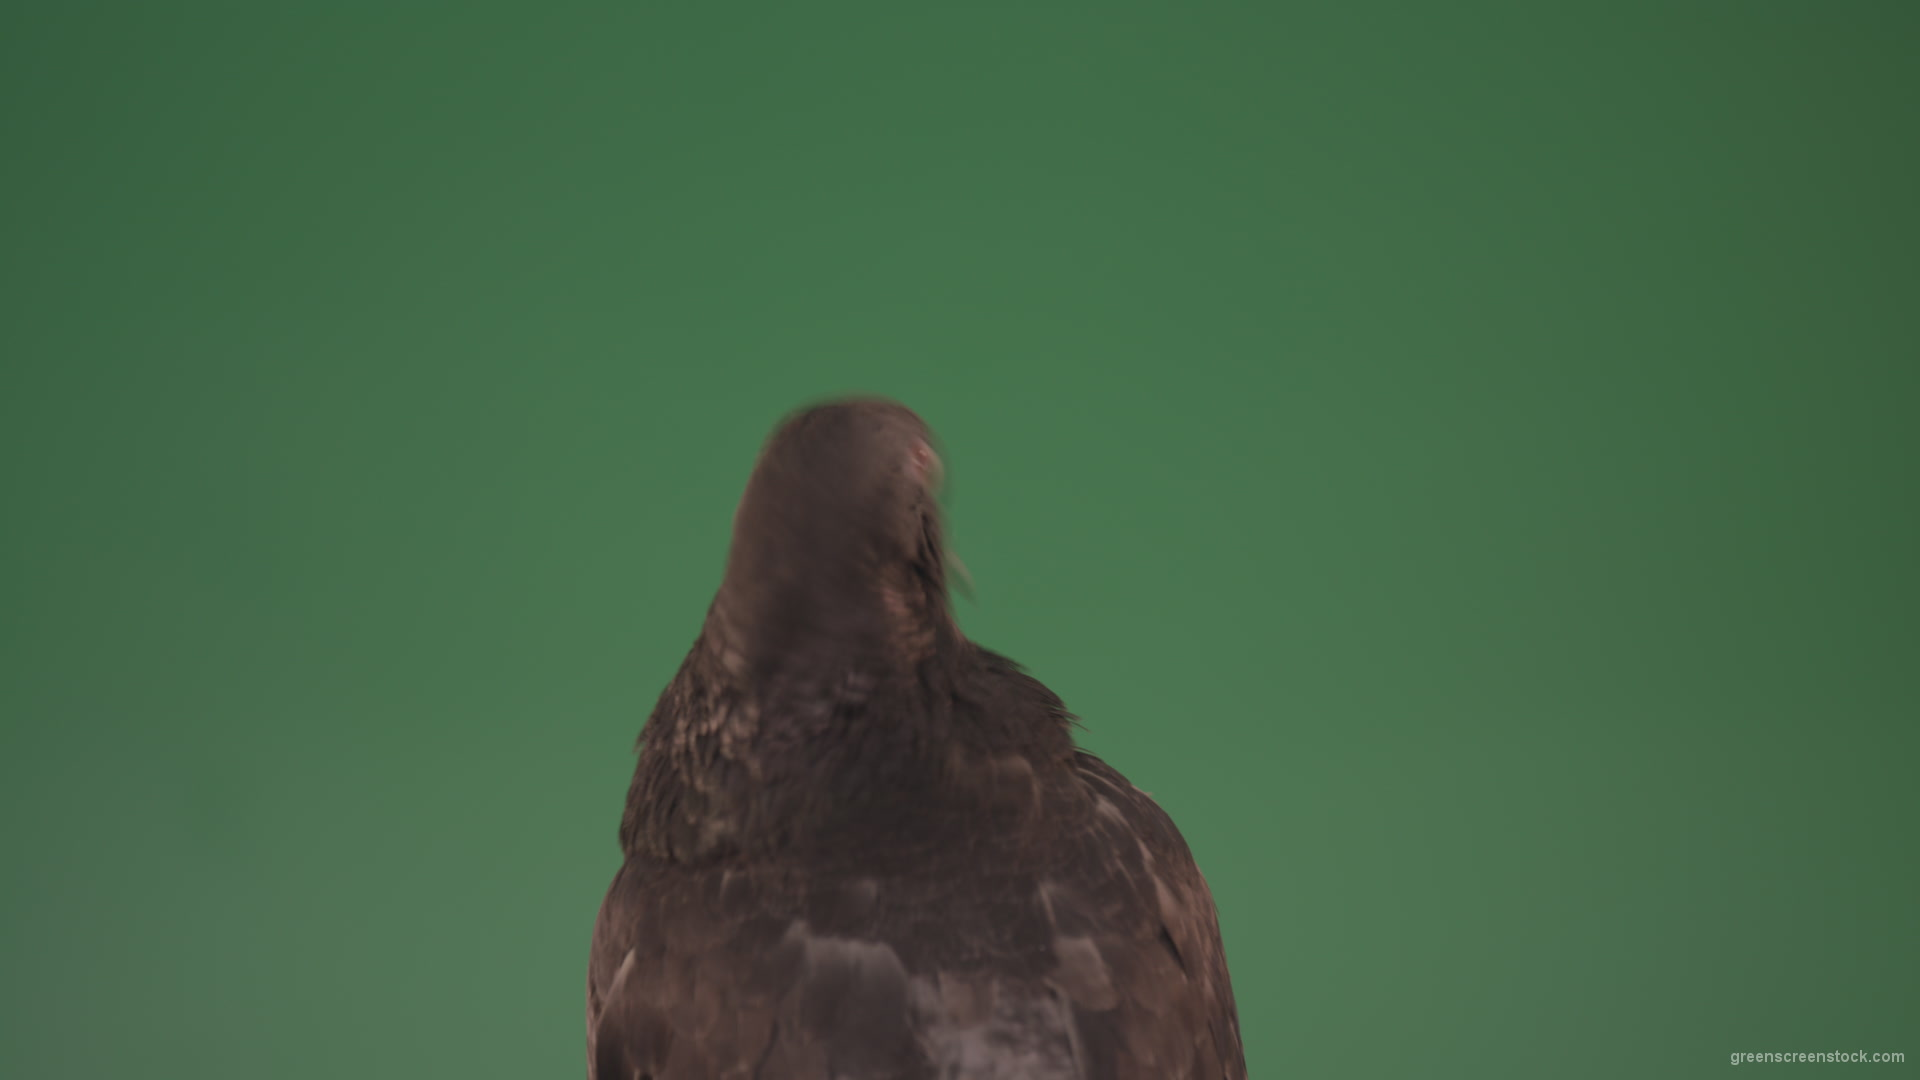 Sitting-wings-to-the-chicken-bird-home-pigeon-isolated-on-chromakey-background_007 Green Screen Stock